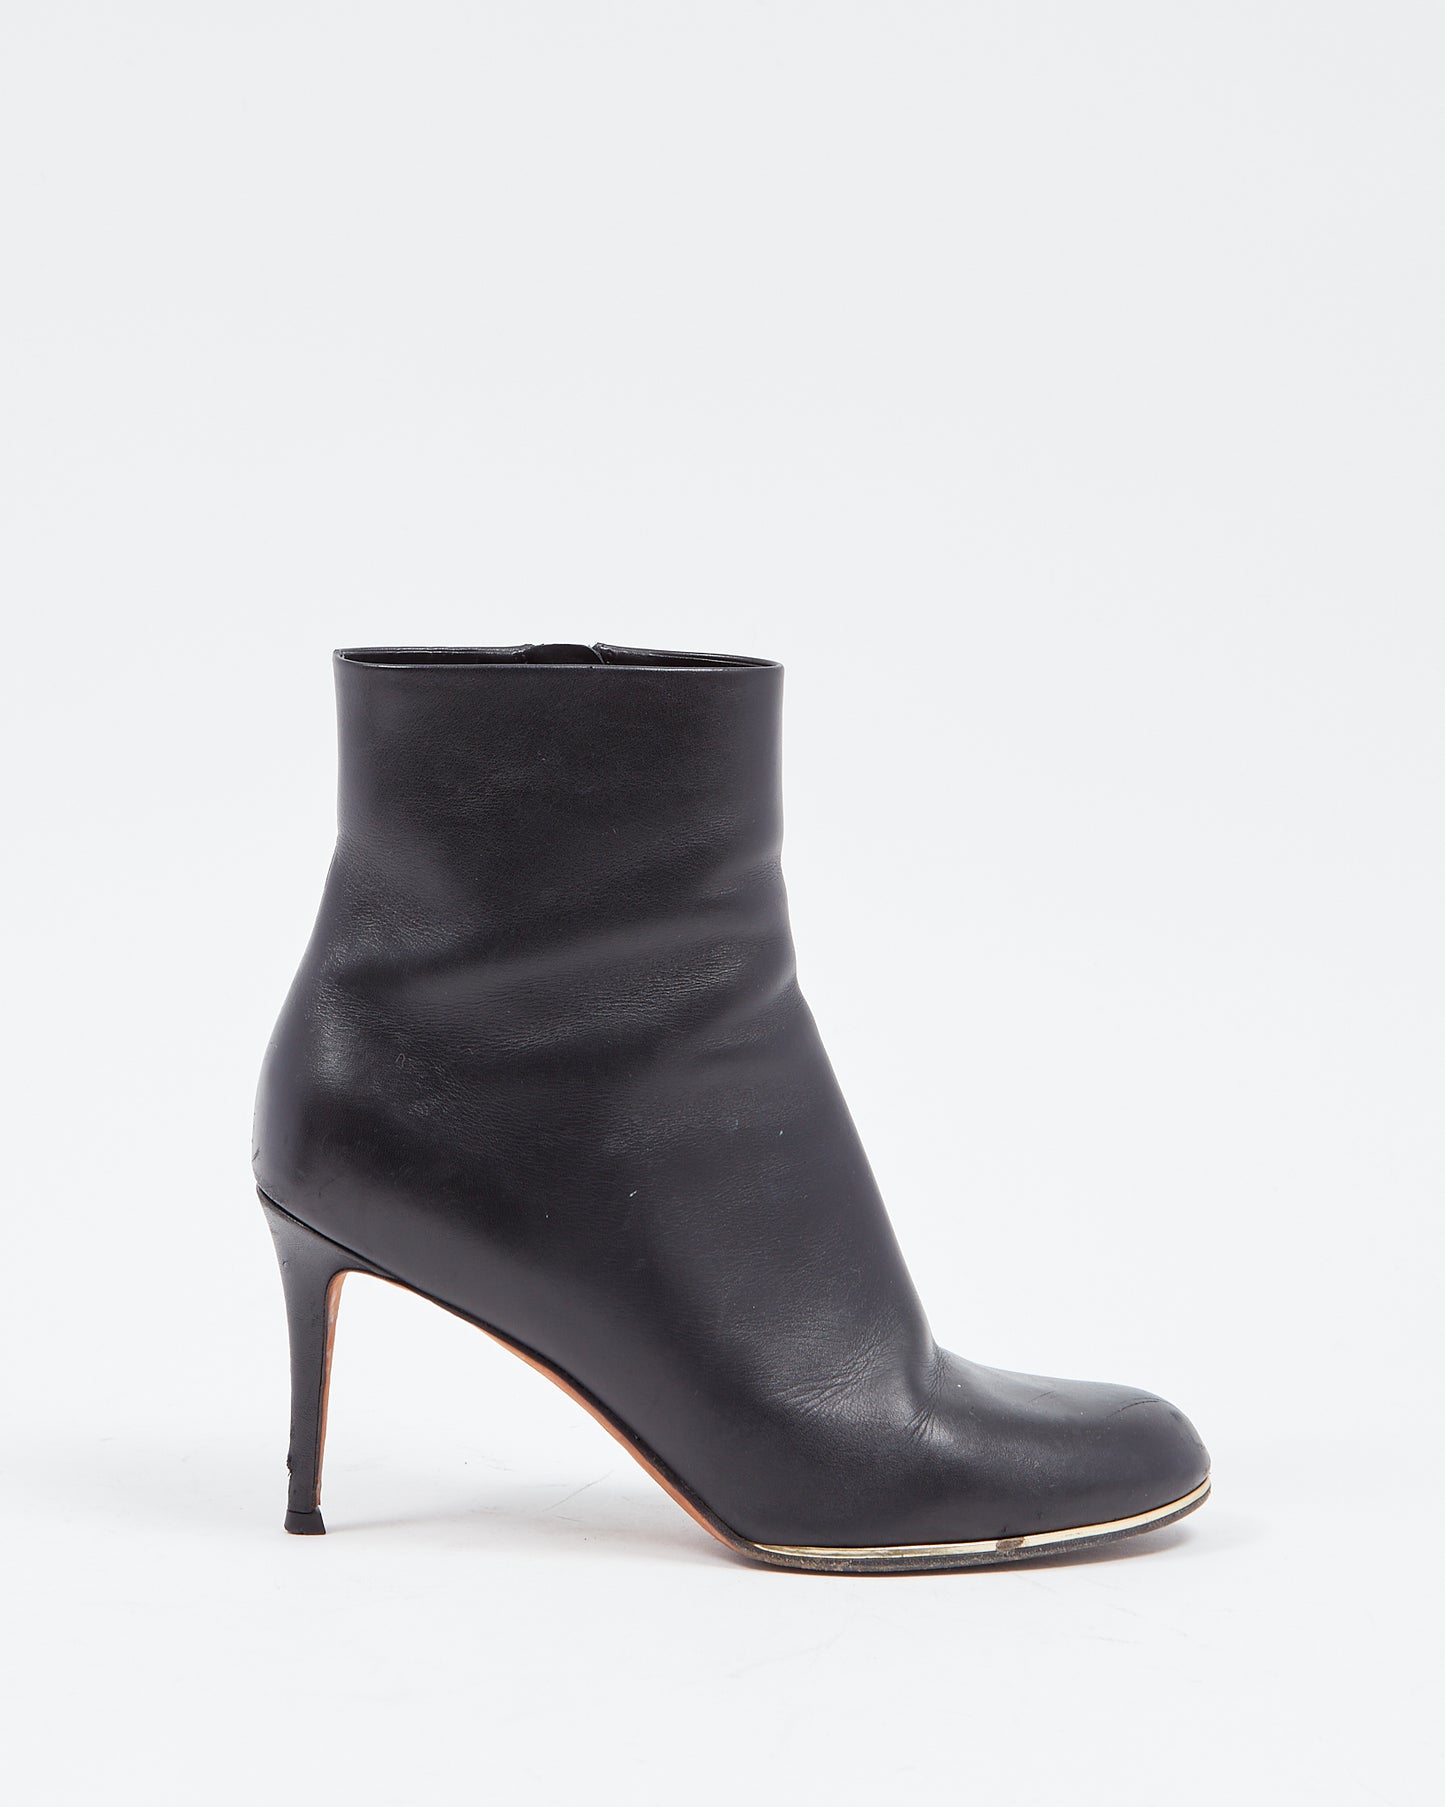 Givenchy Black Leather Gold Rim Heel Booties - 38